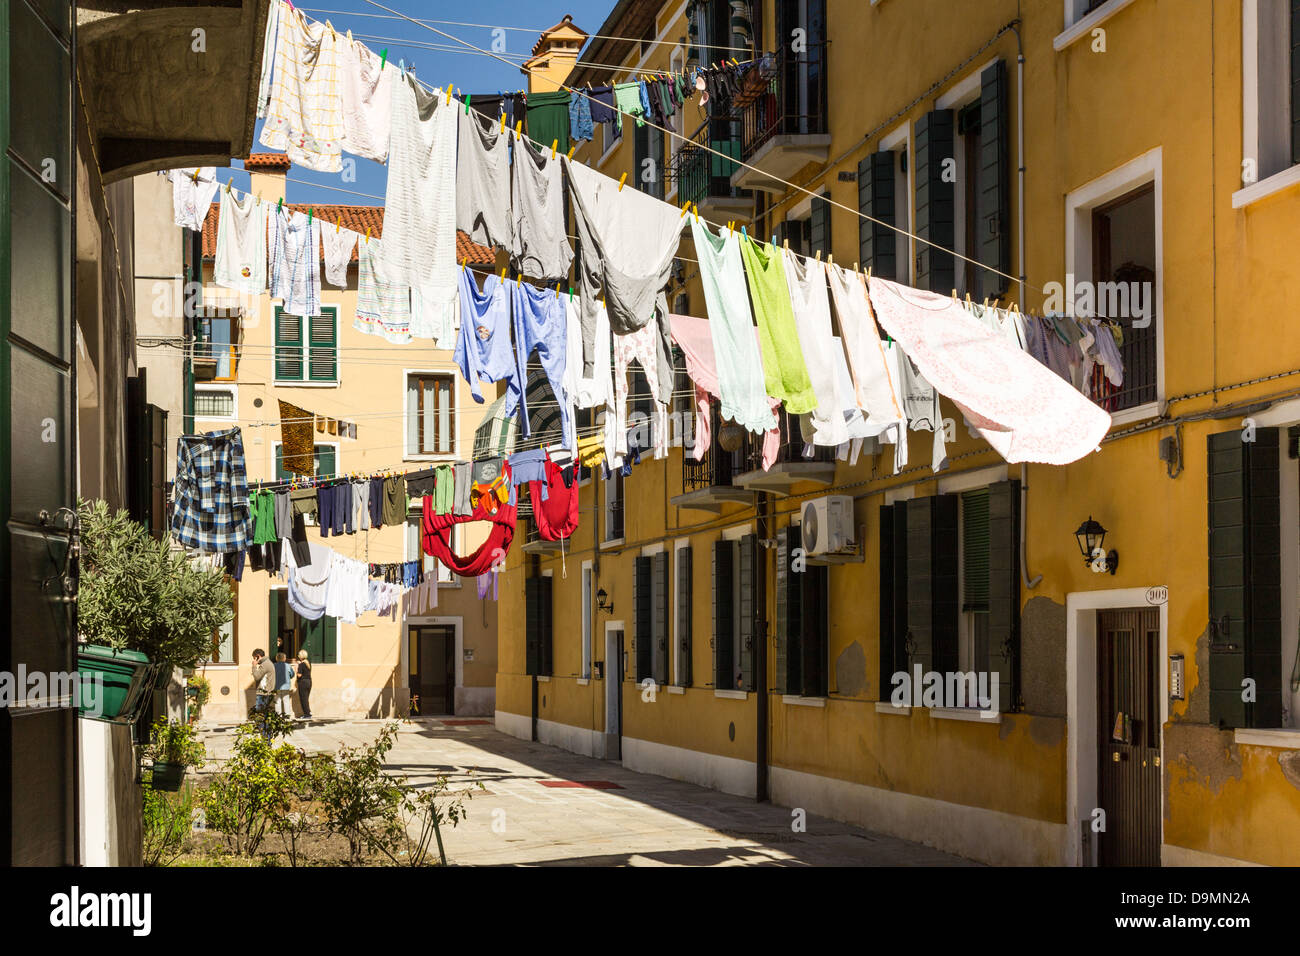 Washing hanging on clothes lines between buildings in Venice Stock Photo